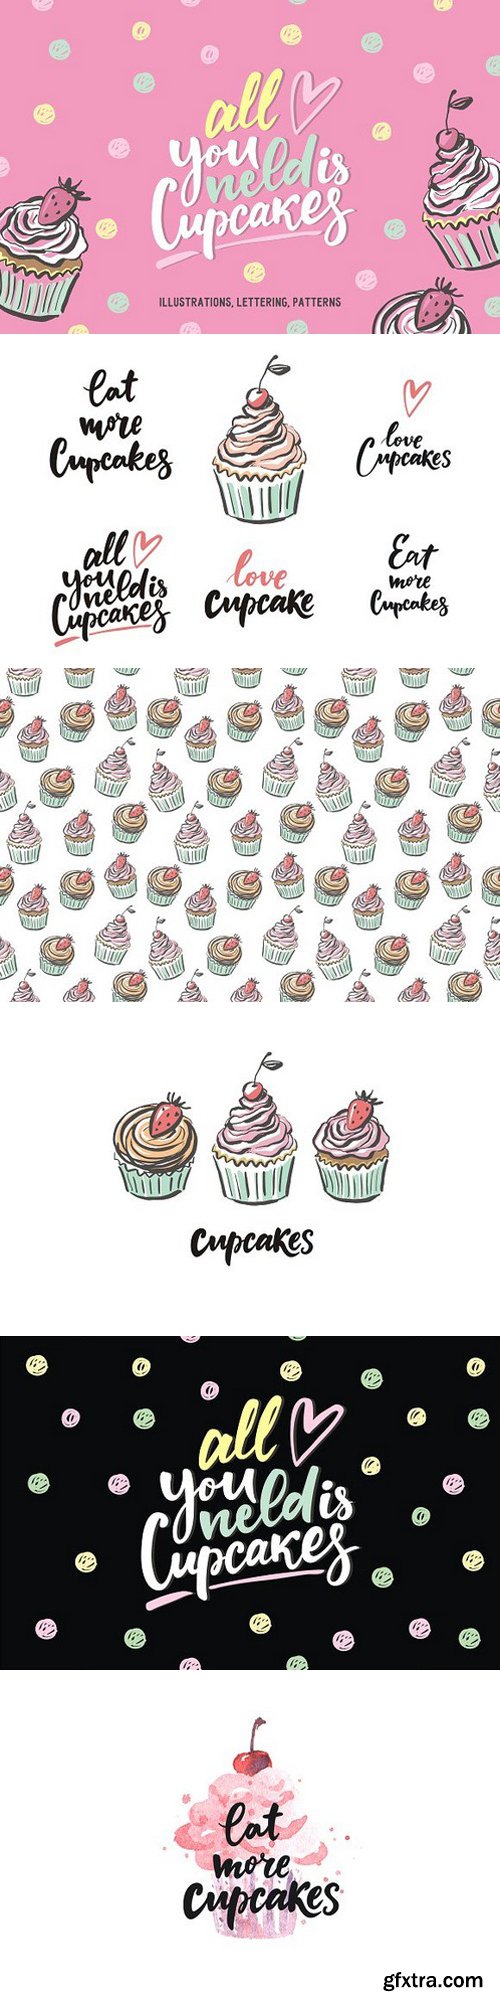 CM - Cupcake pattern, lettering, cards 1226937